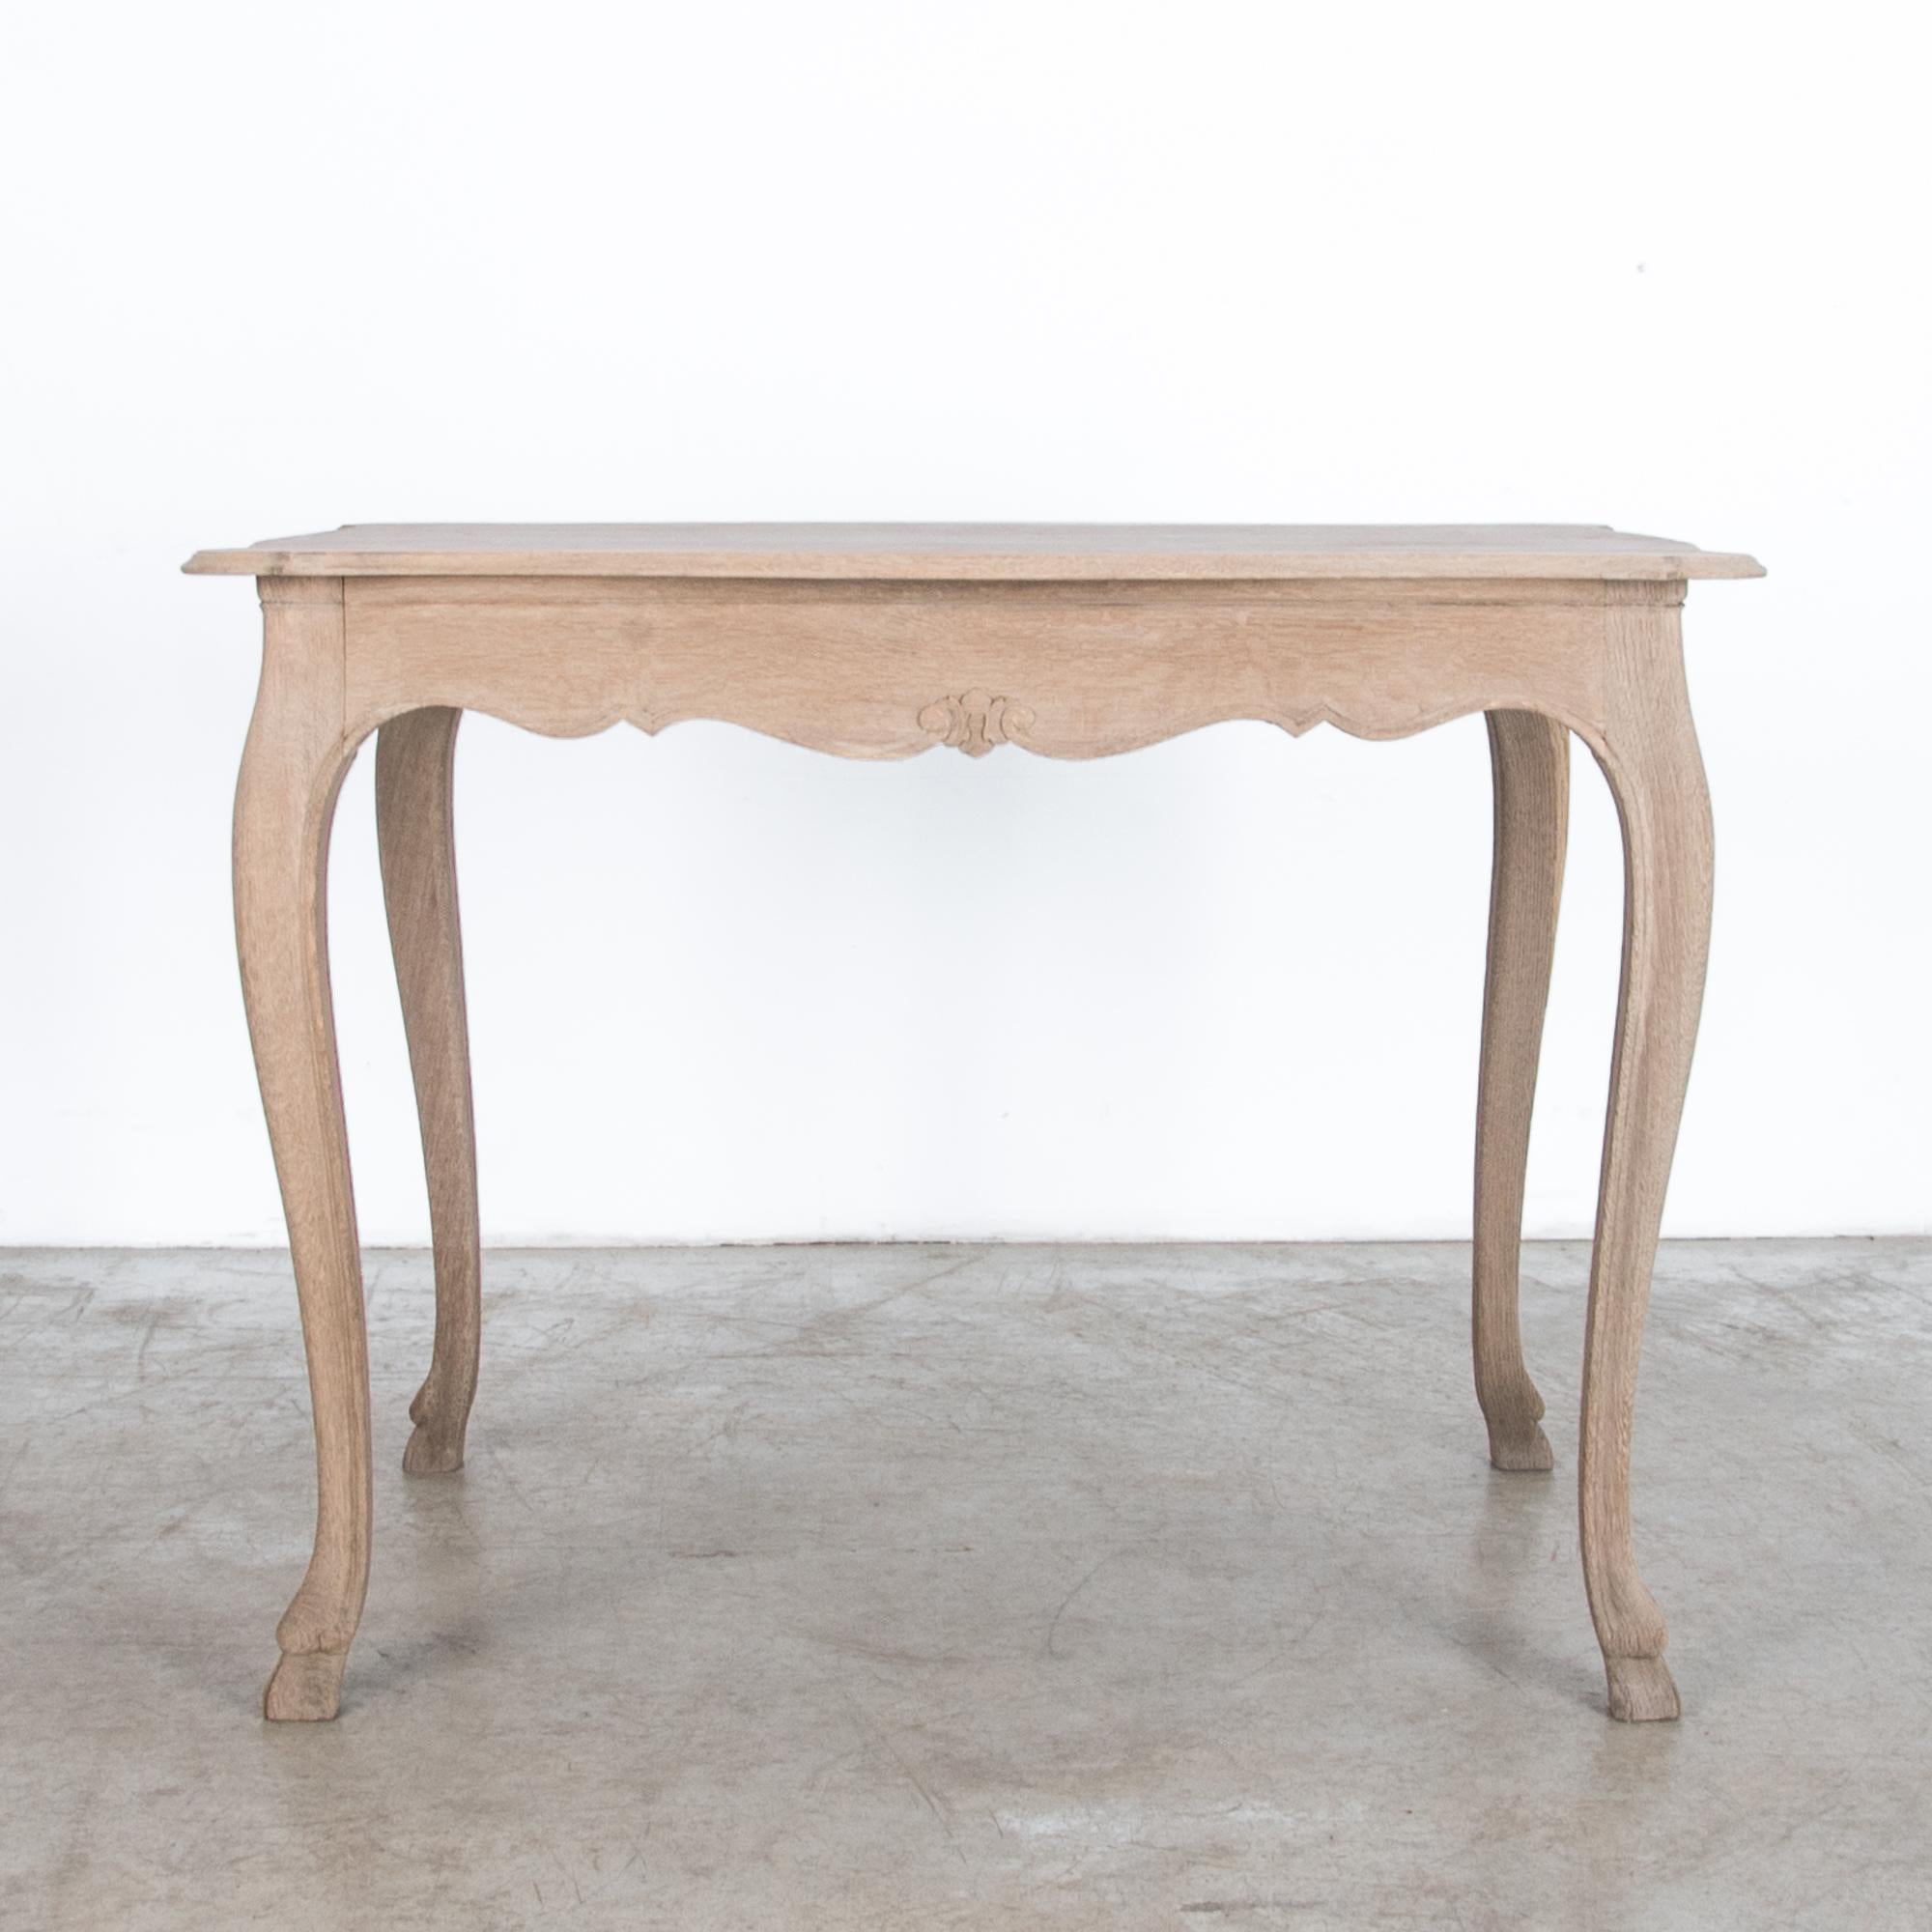 A simple oak table, from France, circa 1900. Rustic yet refined, this oak table is crafted after the traditions of local craftsmen. Away from the capital, carpenters interpreted the latest fashion in pared down styles, recalling their local ambiance